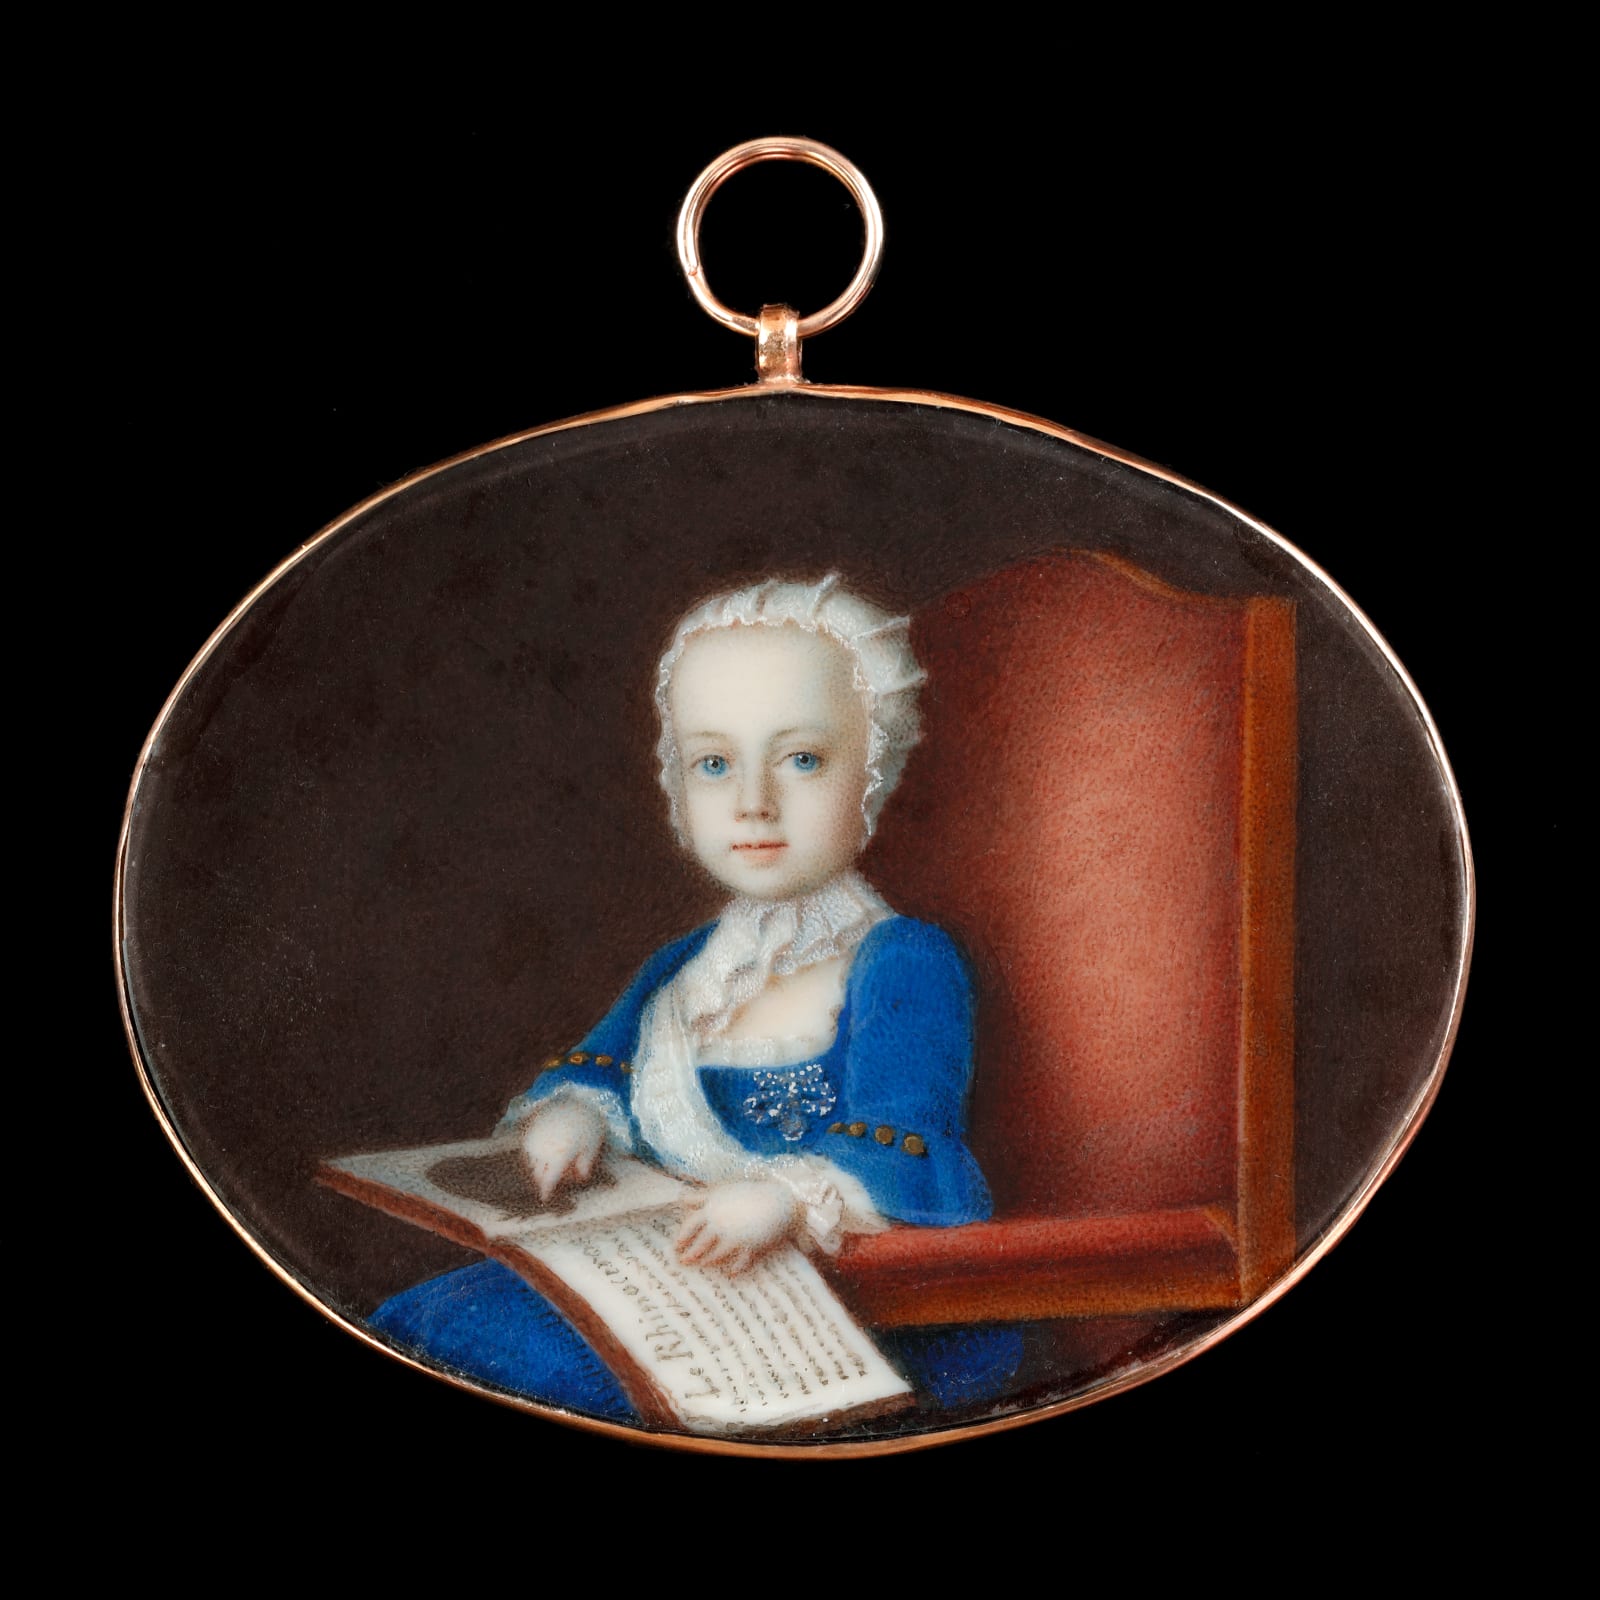 Fig 10, Austrian School, 'Archduke Joseph of Austria as a young child', watercolour on ivory, c.1747